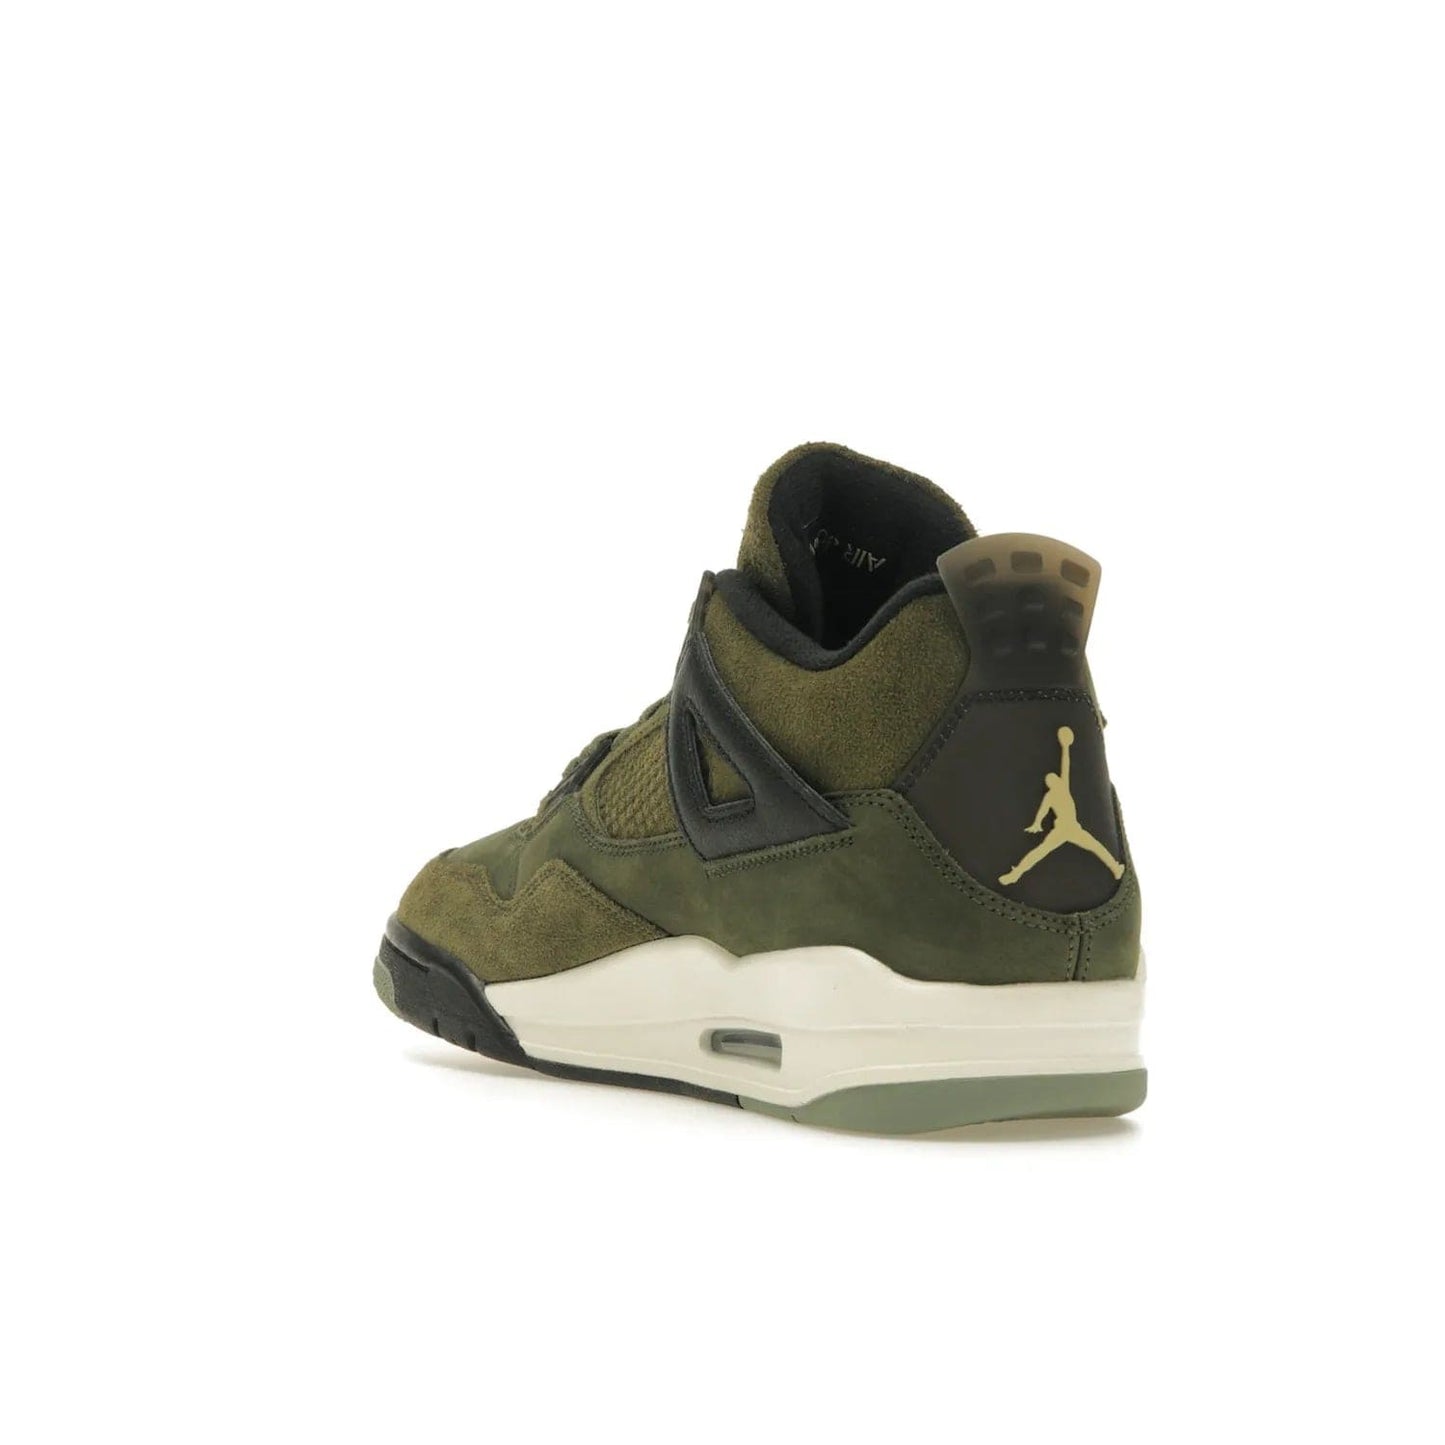 Jordan 4 Retro SE Craft Medium Olive - Image 25 - Only at www.BallersClubKickz.com - Grab the Jordan 4 Retro SE Crafts for a unique style. Combines Medium Olive, Pale Vanilla, Khaki, Black and Sail, with same classic shape, cushioning, and rubber outsole. Available on November 18th!